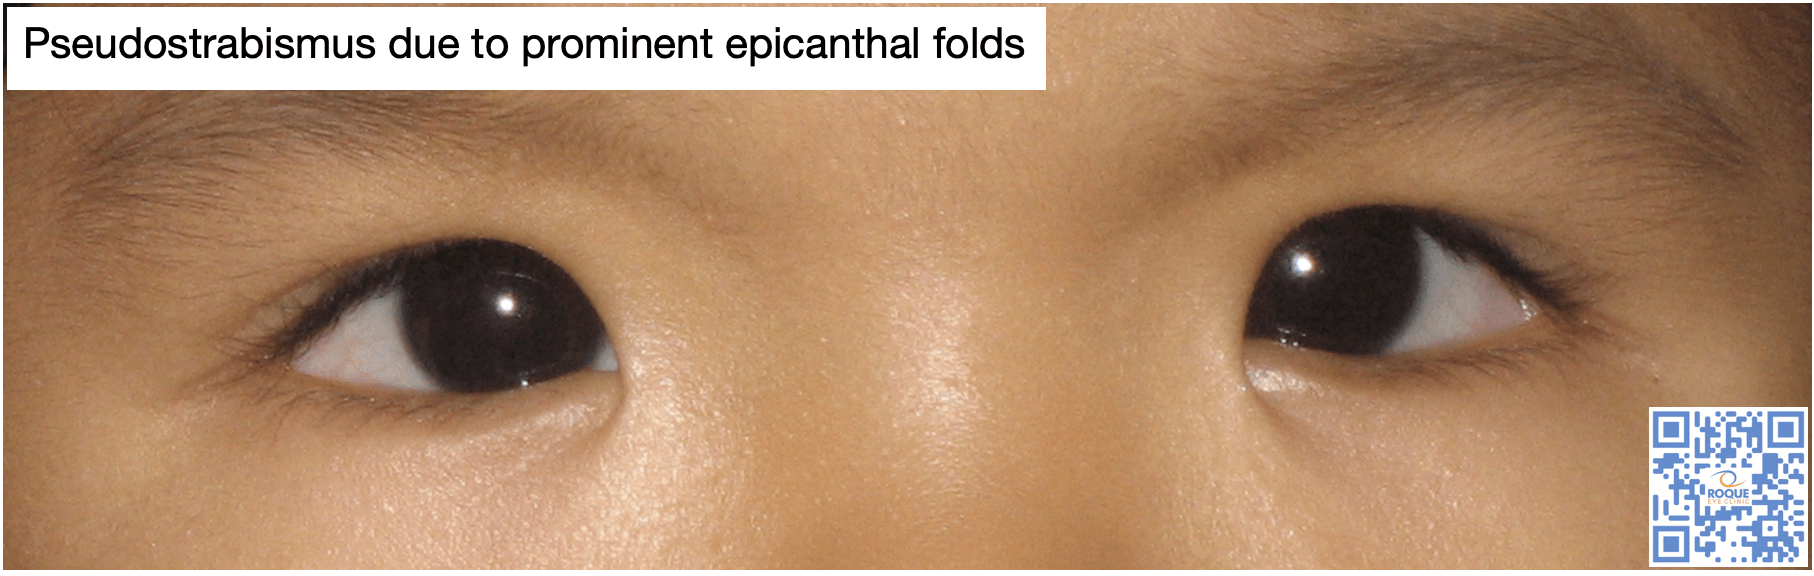 Pseudostrabismus due to prominent epicanthal folds